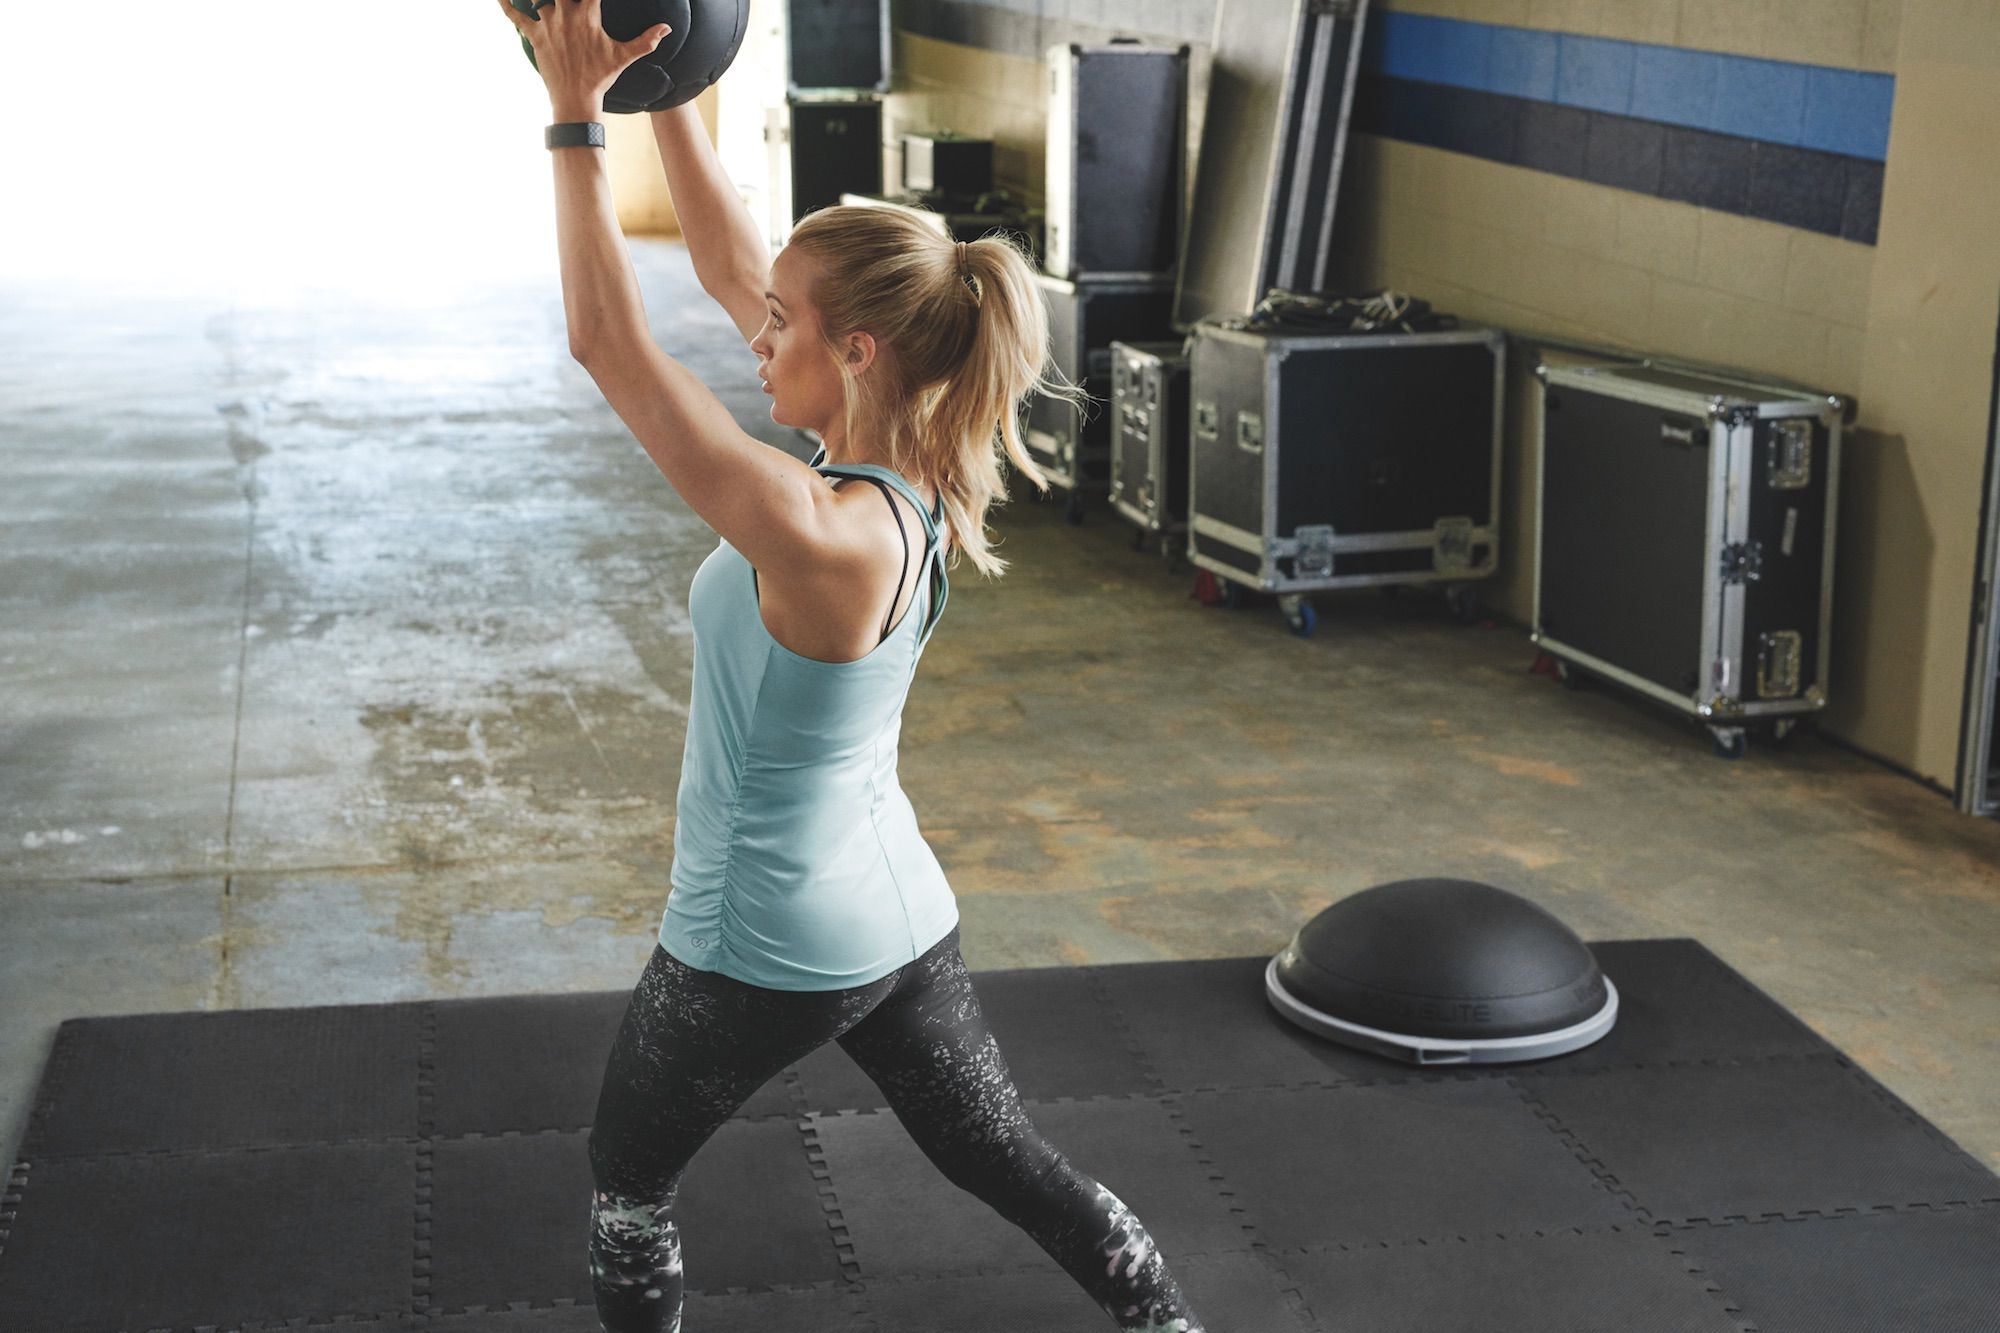 Tackle New Year Fitness Goals with Calia by Carrie Underwood